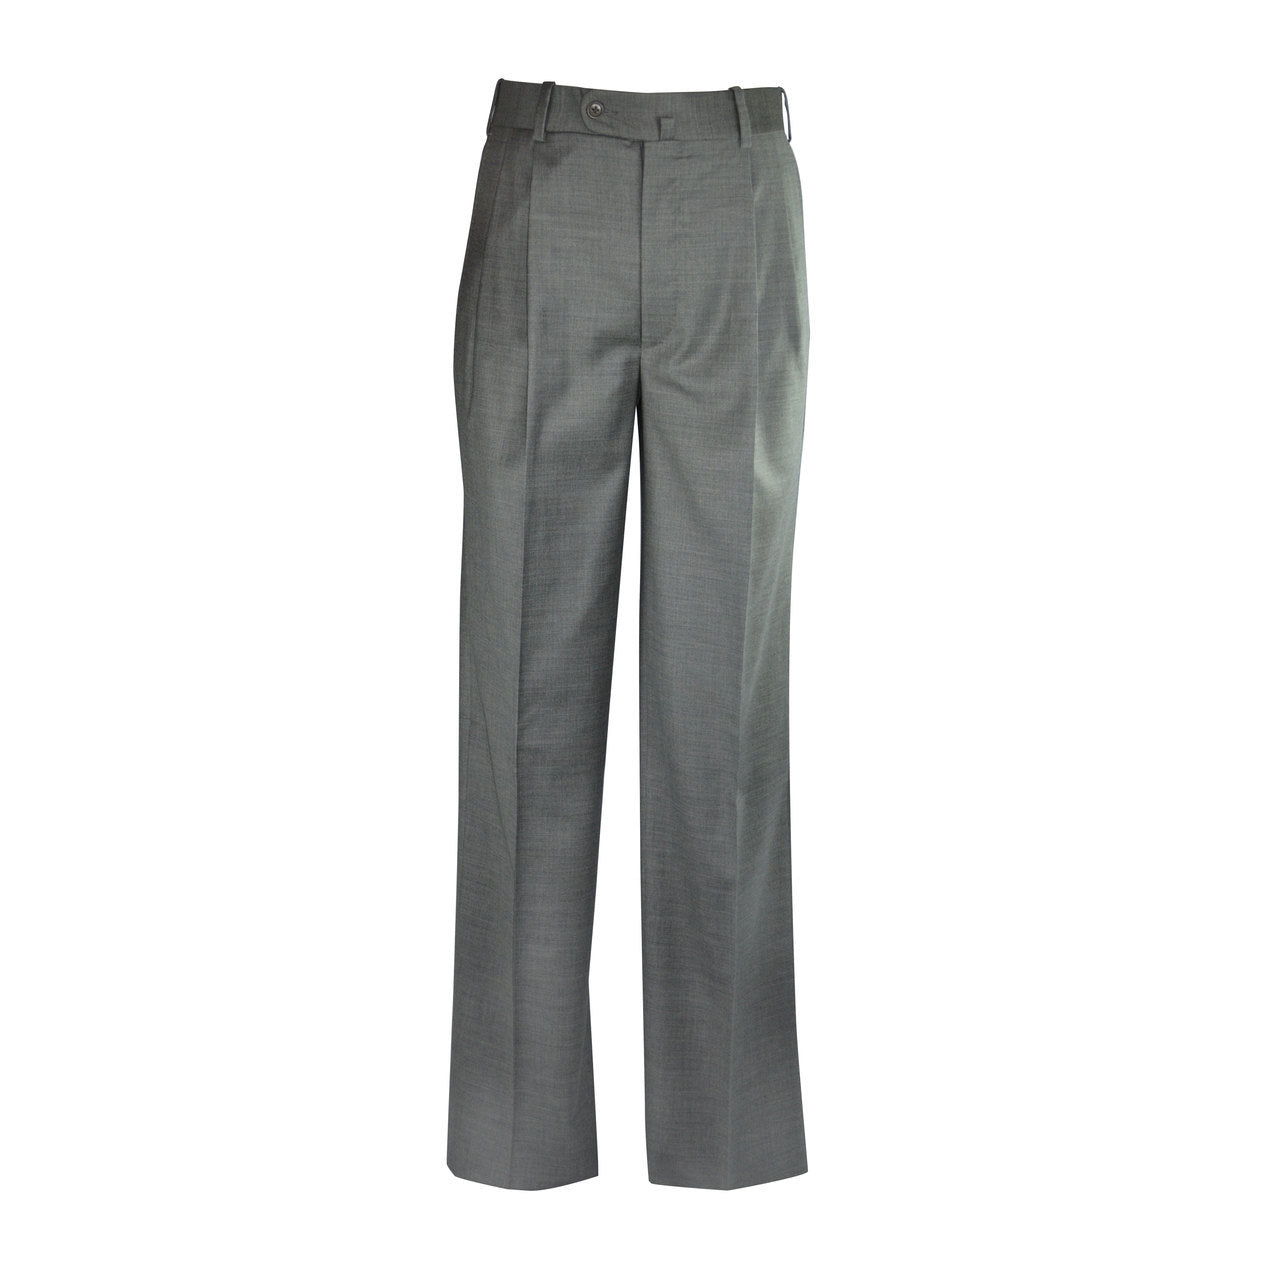 Newport Pleated Front Trouser - Ash